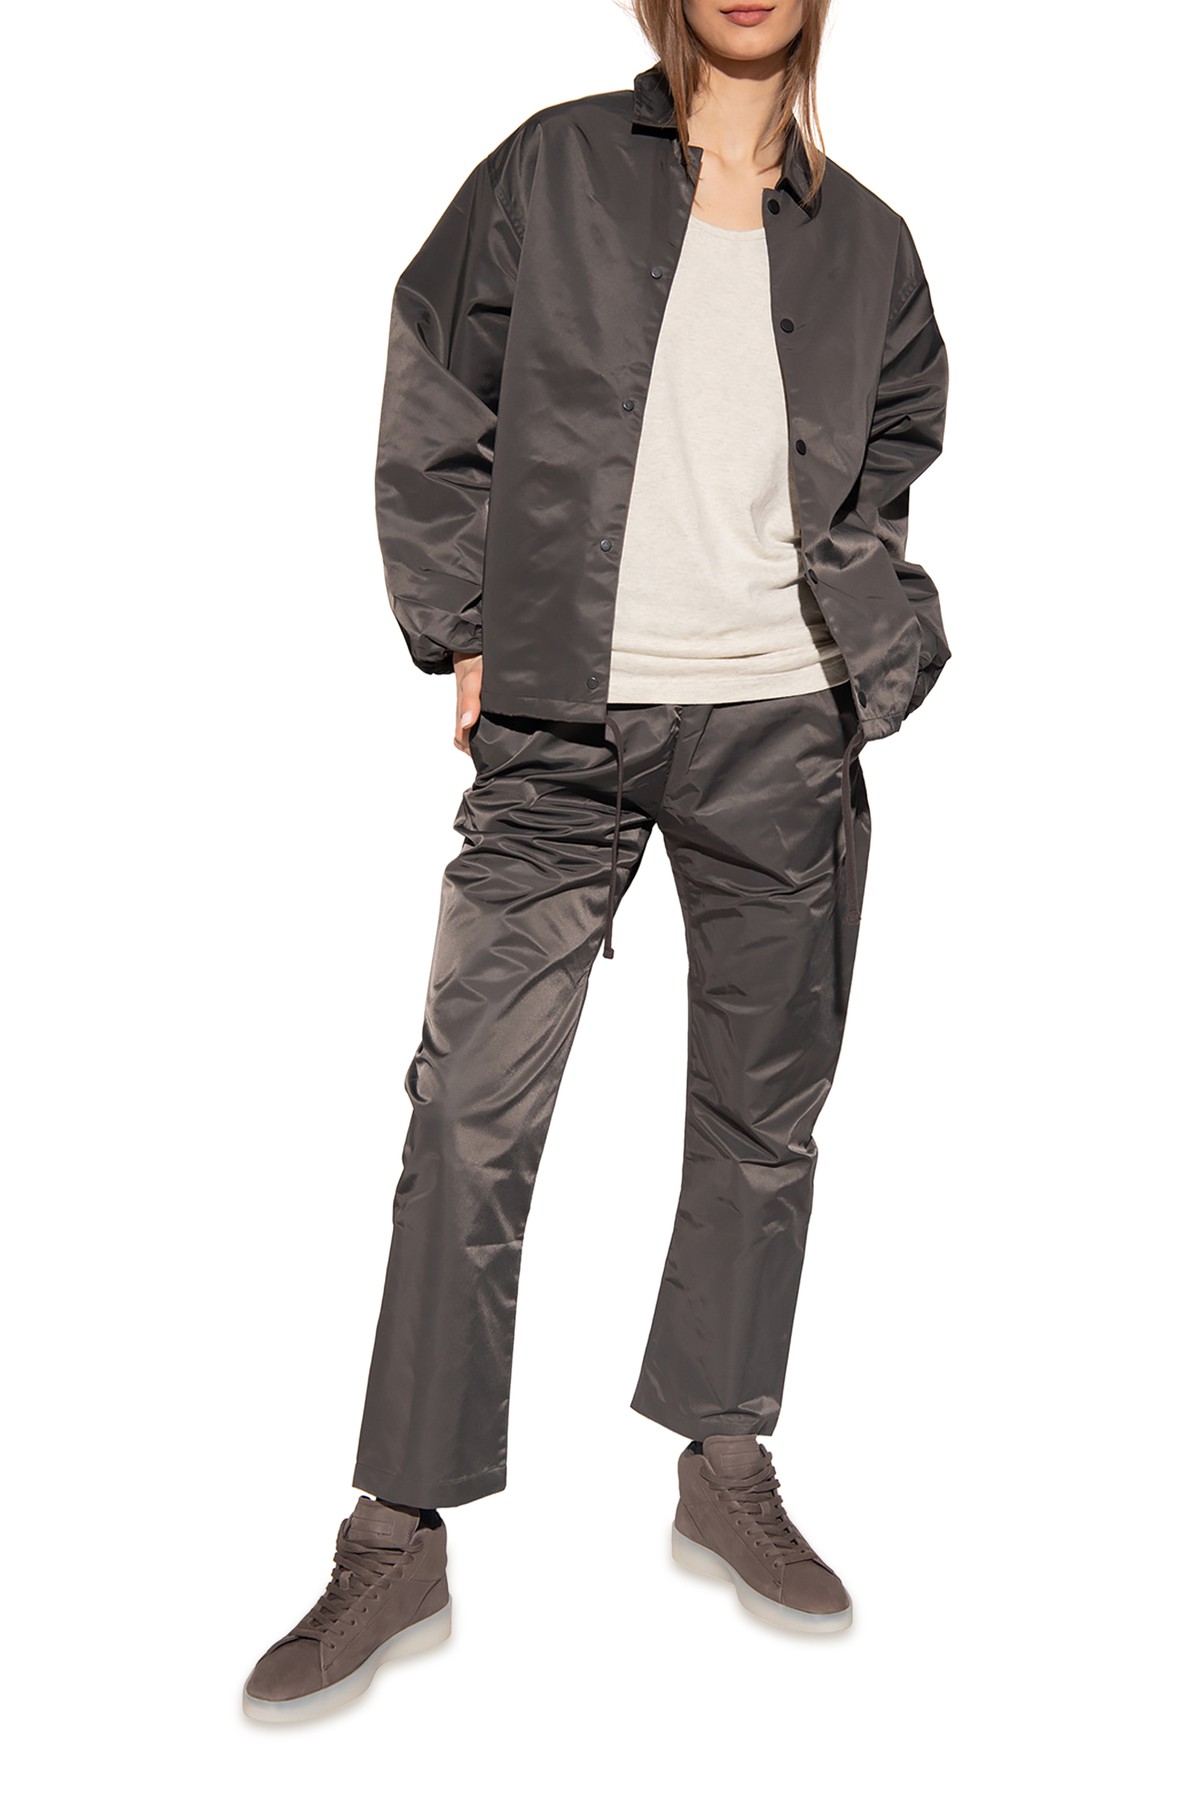 Fear Of God Essentials Patched trousers